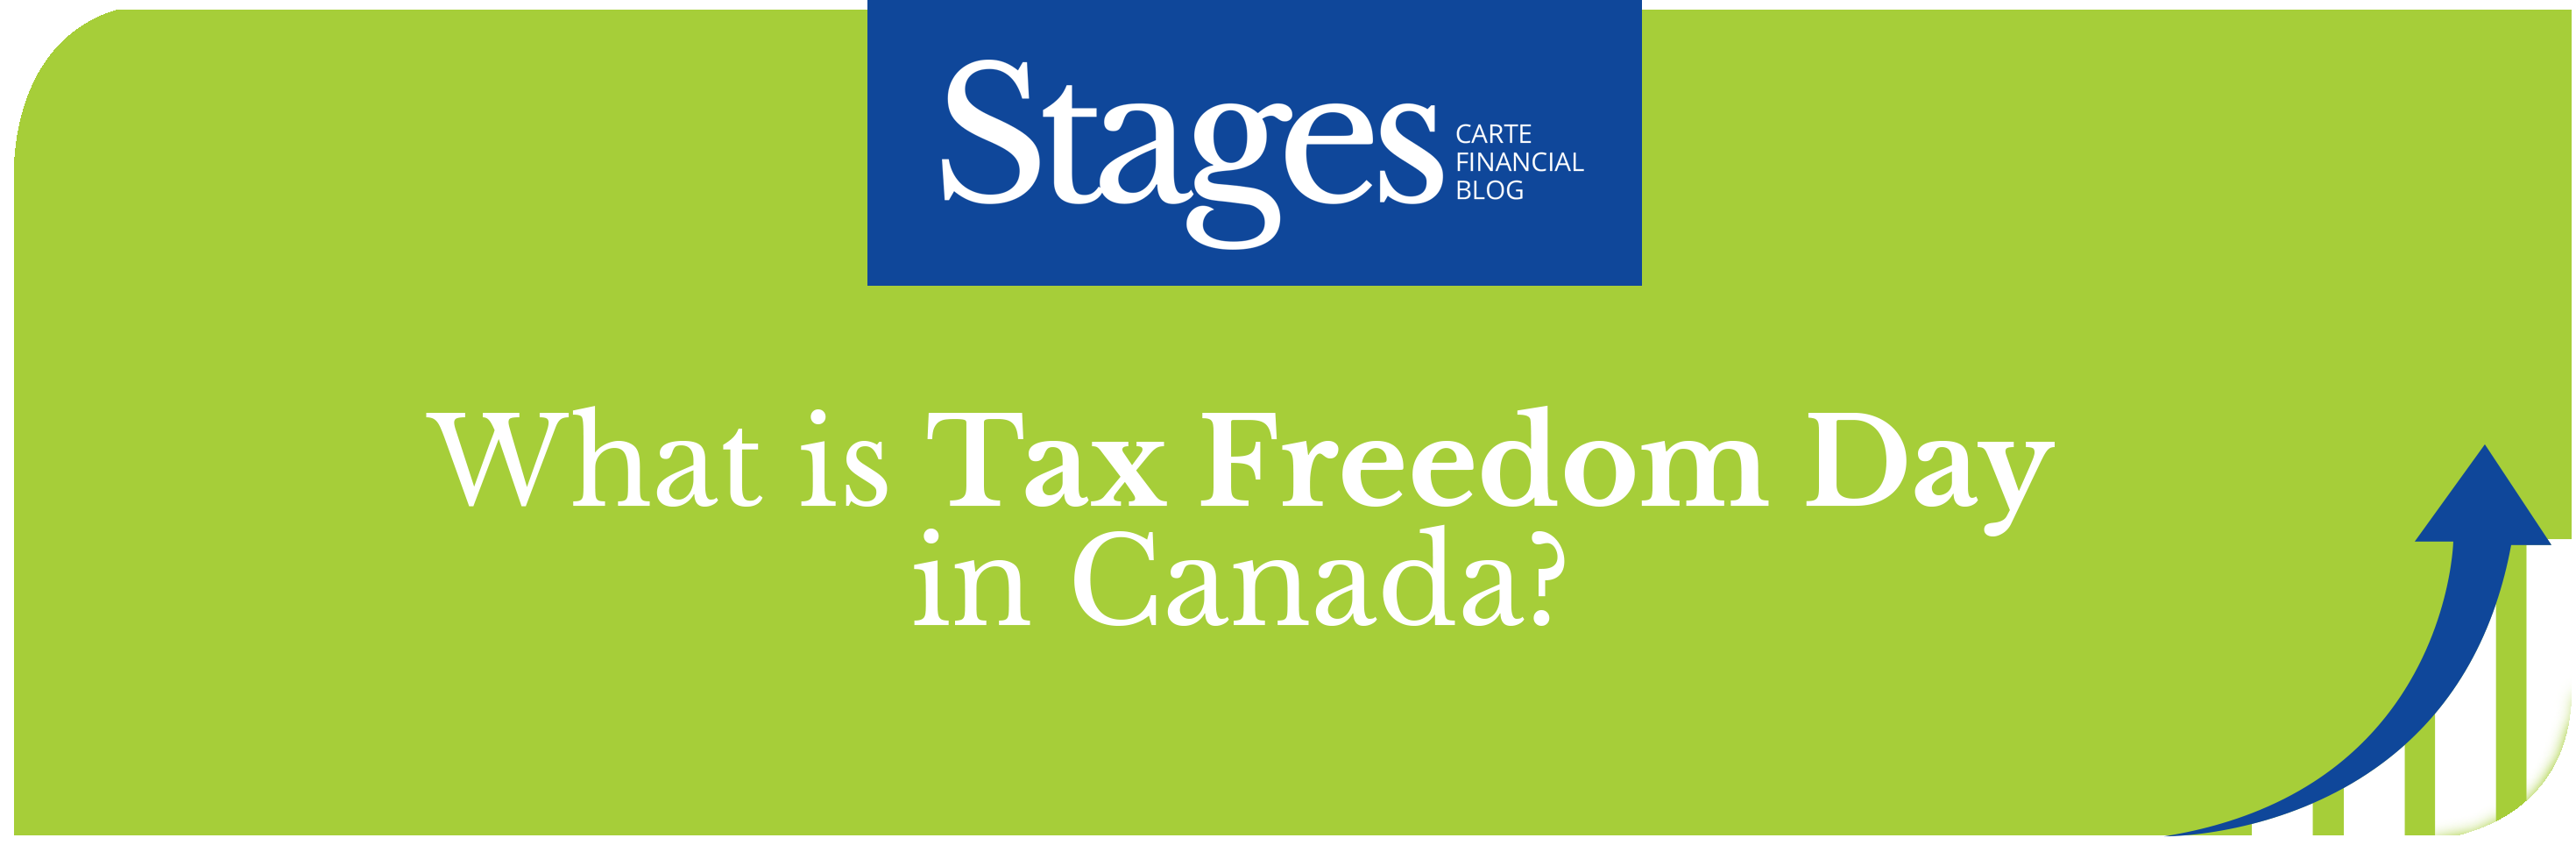 What is Tax Freedom Day in Canada? Wealth Financial